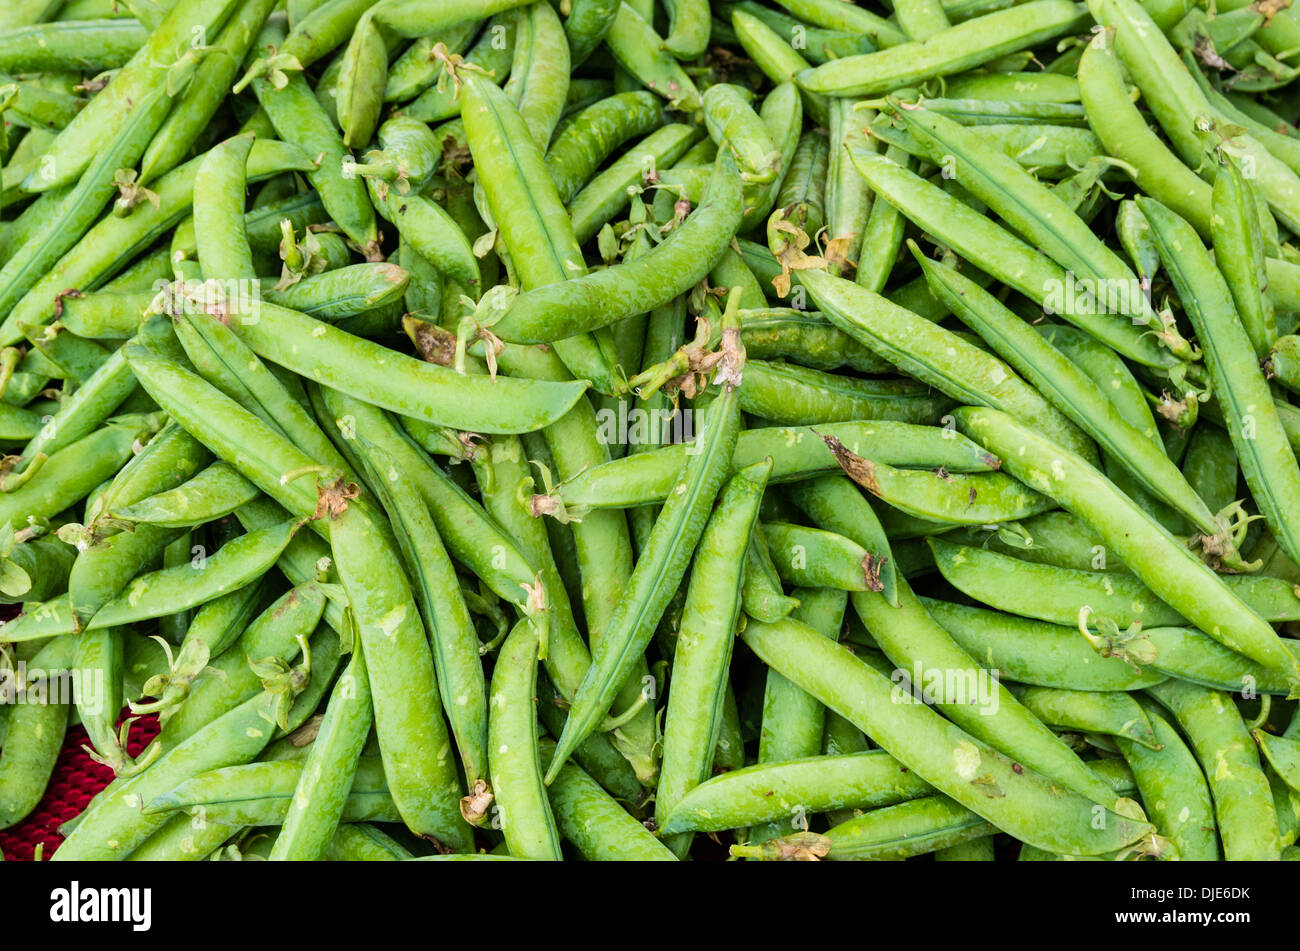 Green peas fresh picked at the farmers market Stock Photo